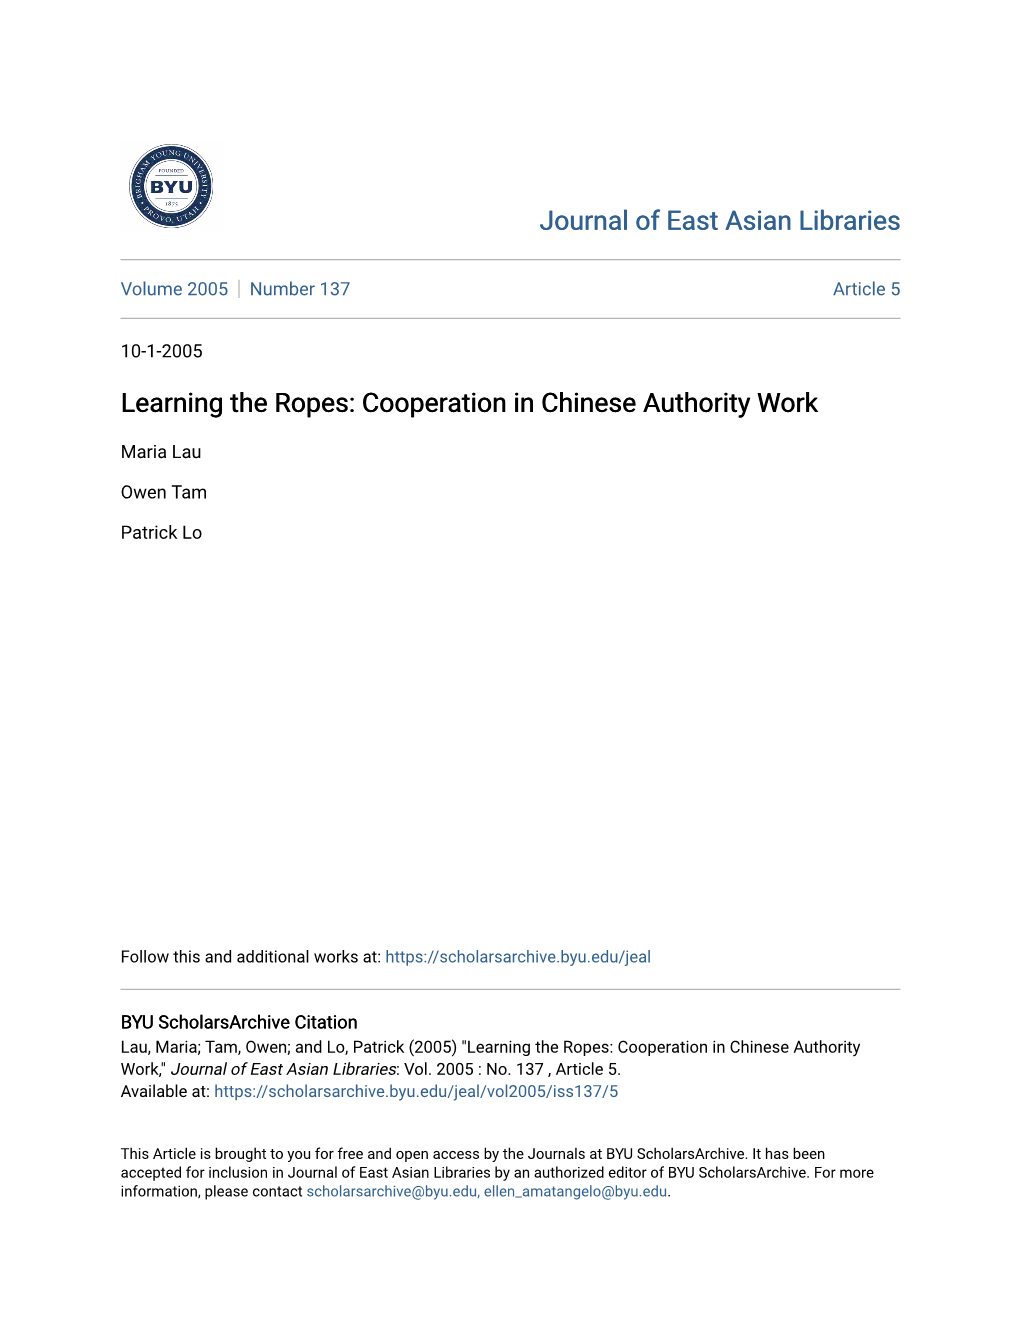 Learning the Ropes: Cooperation in Chinese Authority Work